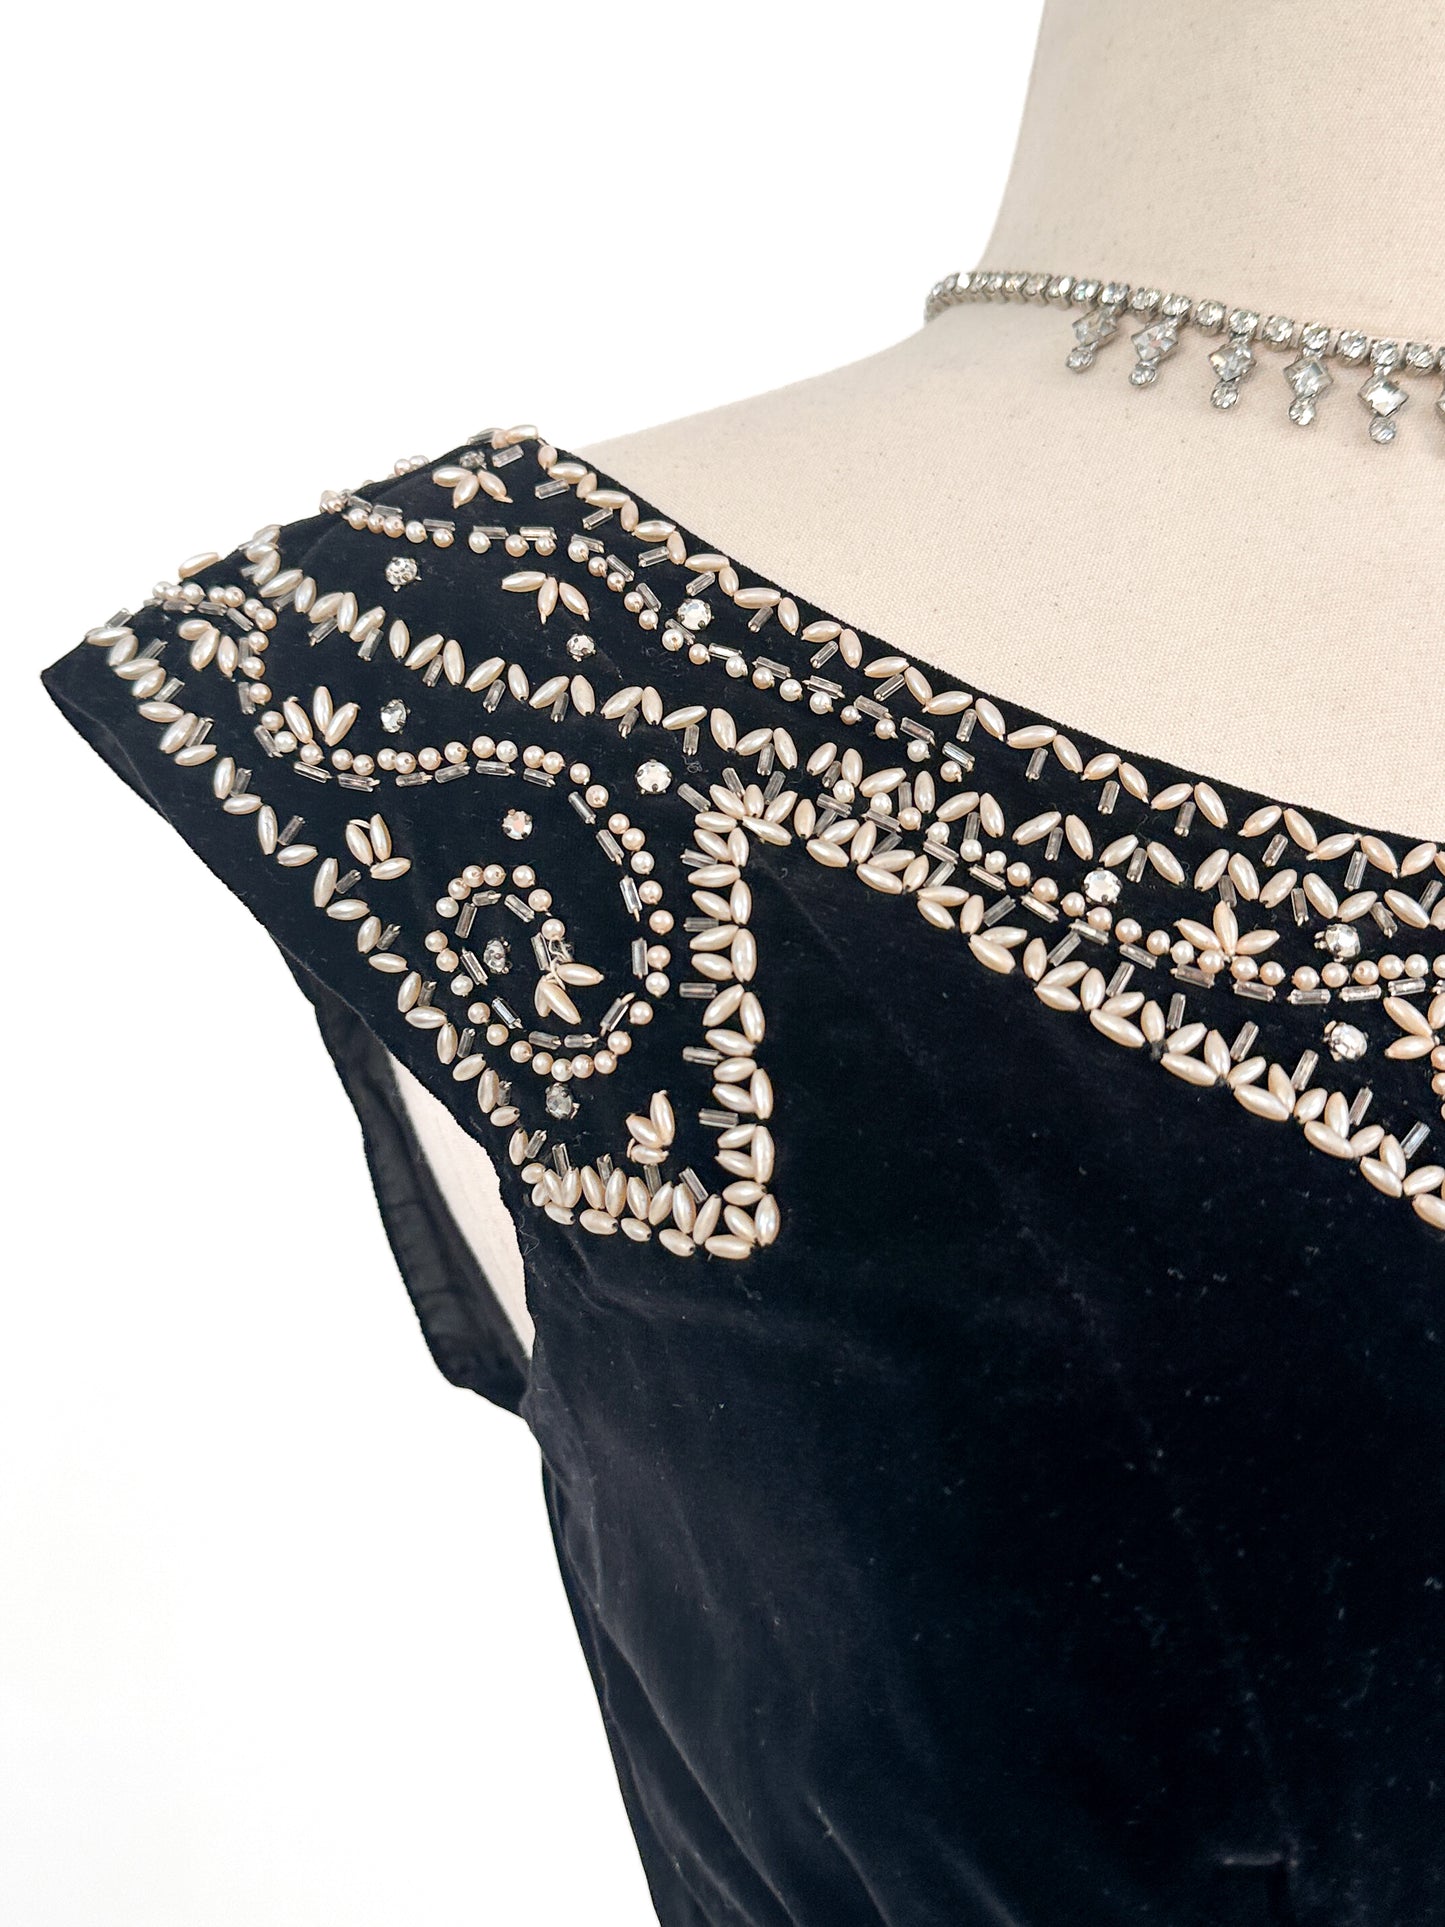 1950s Velvet Beaded Top with Pearls and Rhinestones / Bust 38"